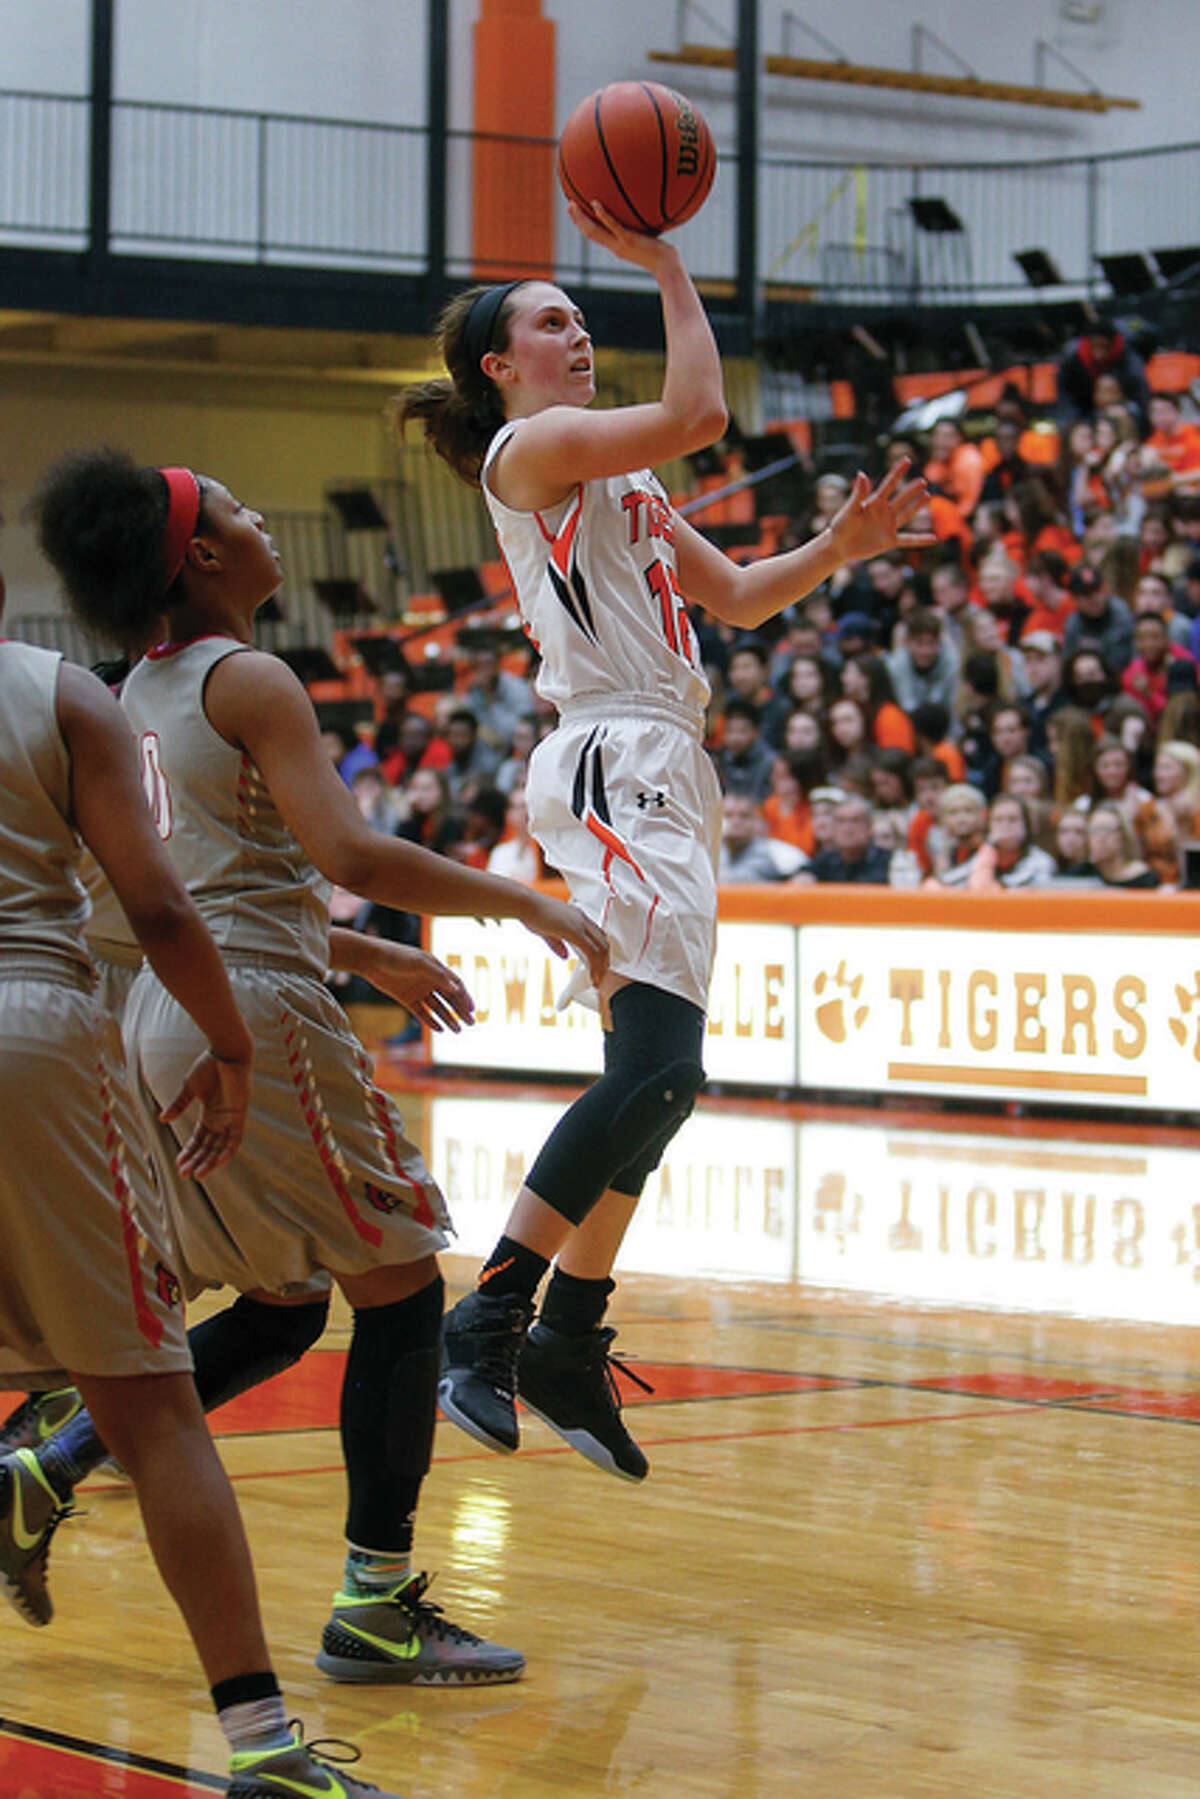 Edwardsville’s Makenzie Silvey puts up a shot for two of her game-high 21 points Friday night in Edwardsville,